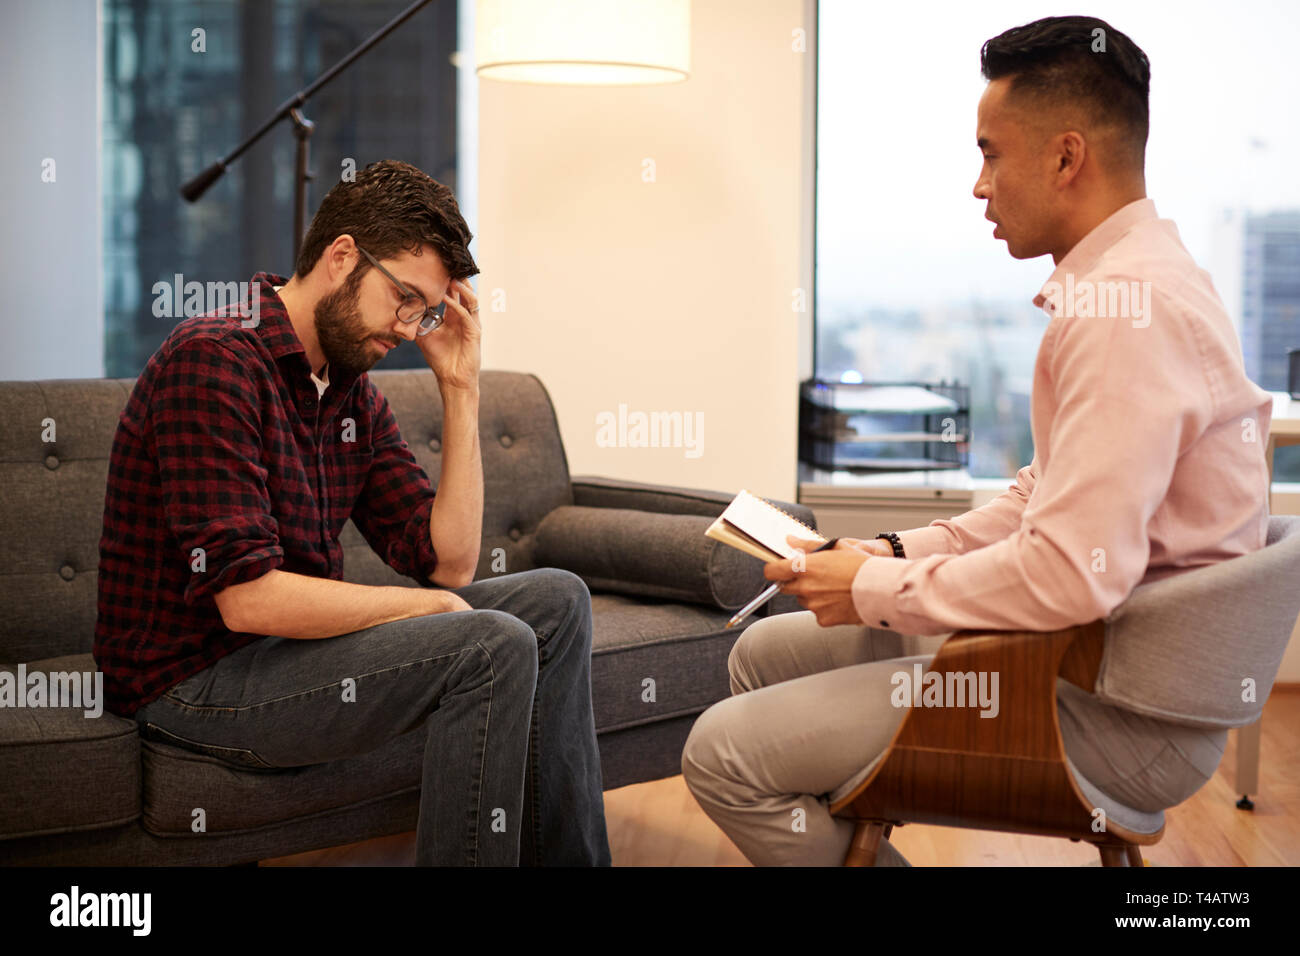 Unhappy Man Sitting On Couch Meeting With Male Counsellor In Office Stock Photo